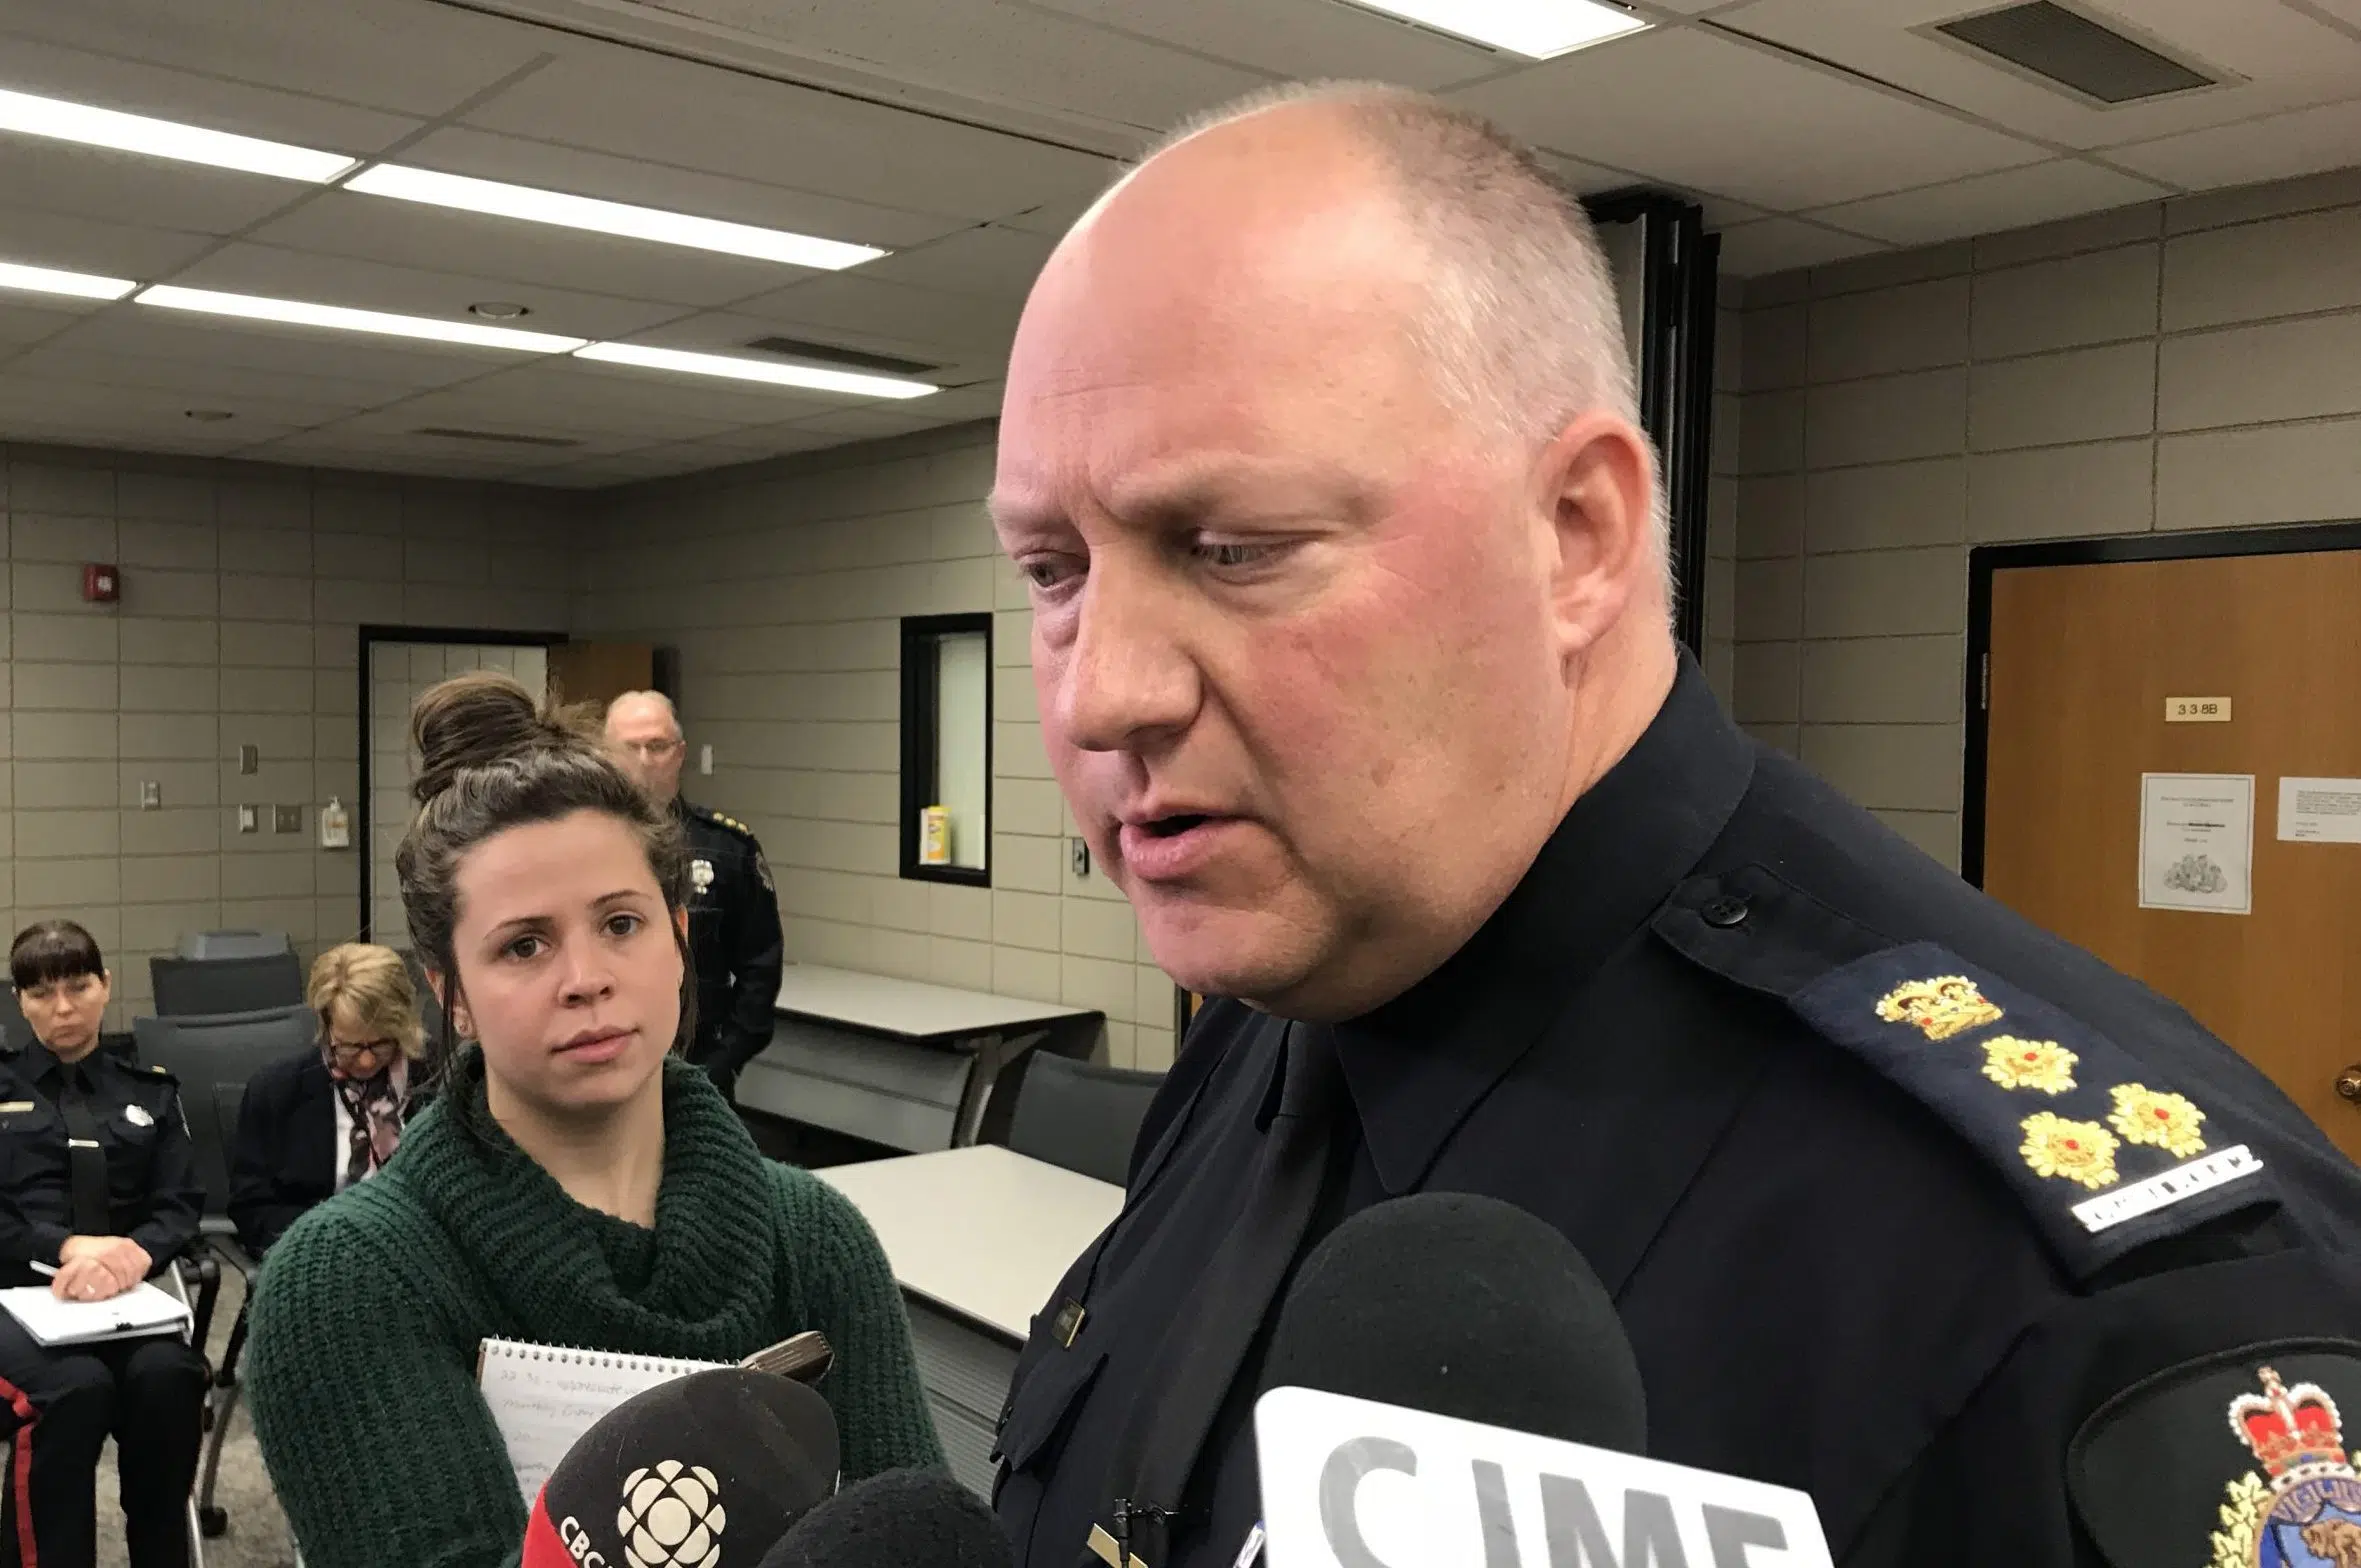 Some crime down, but warm weather could lead to increase: Chief Bray